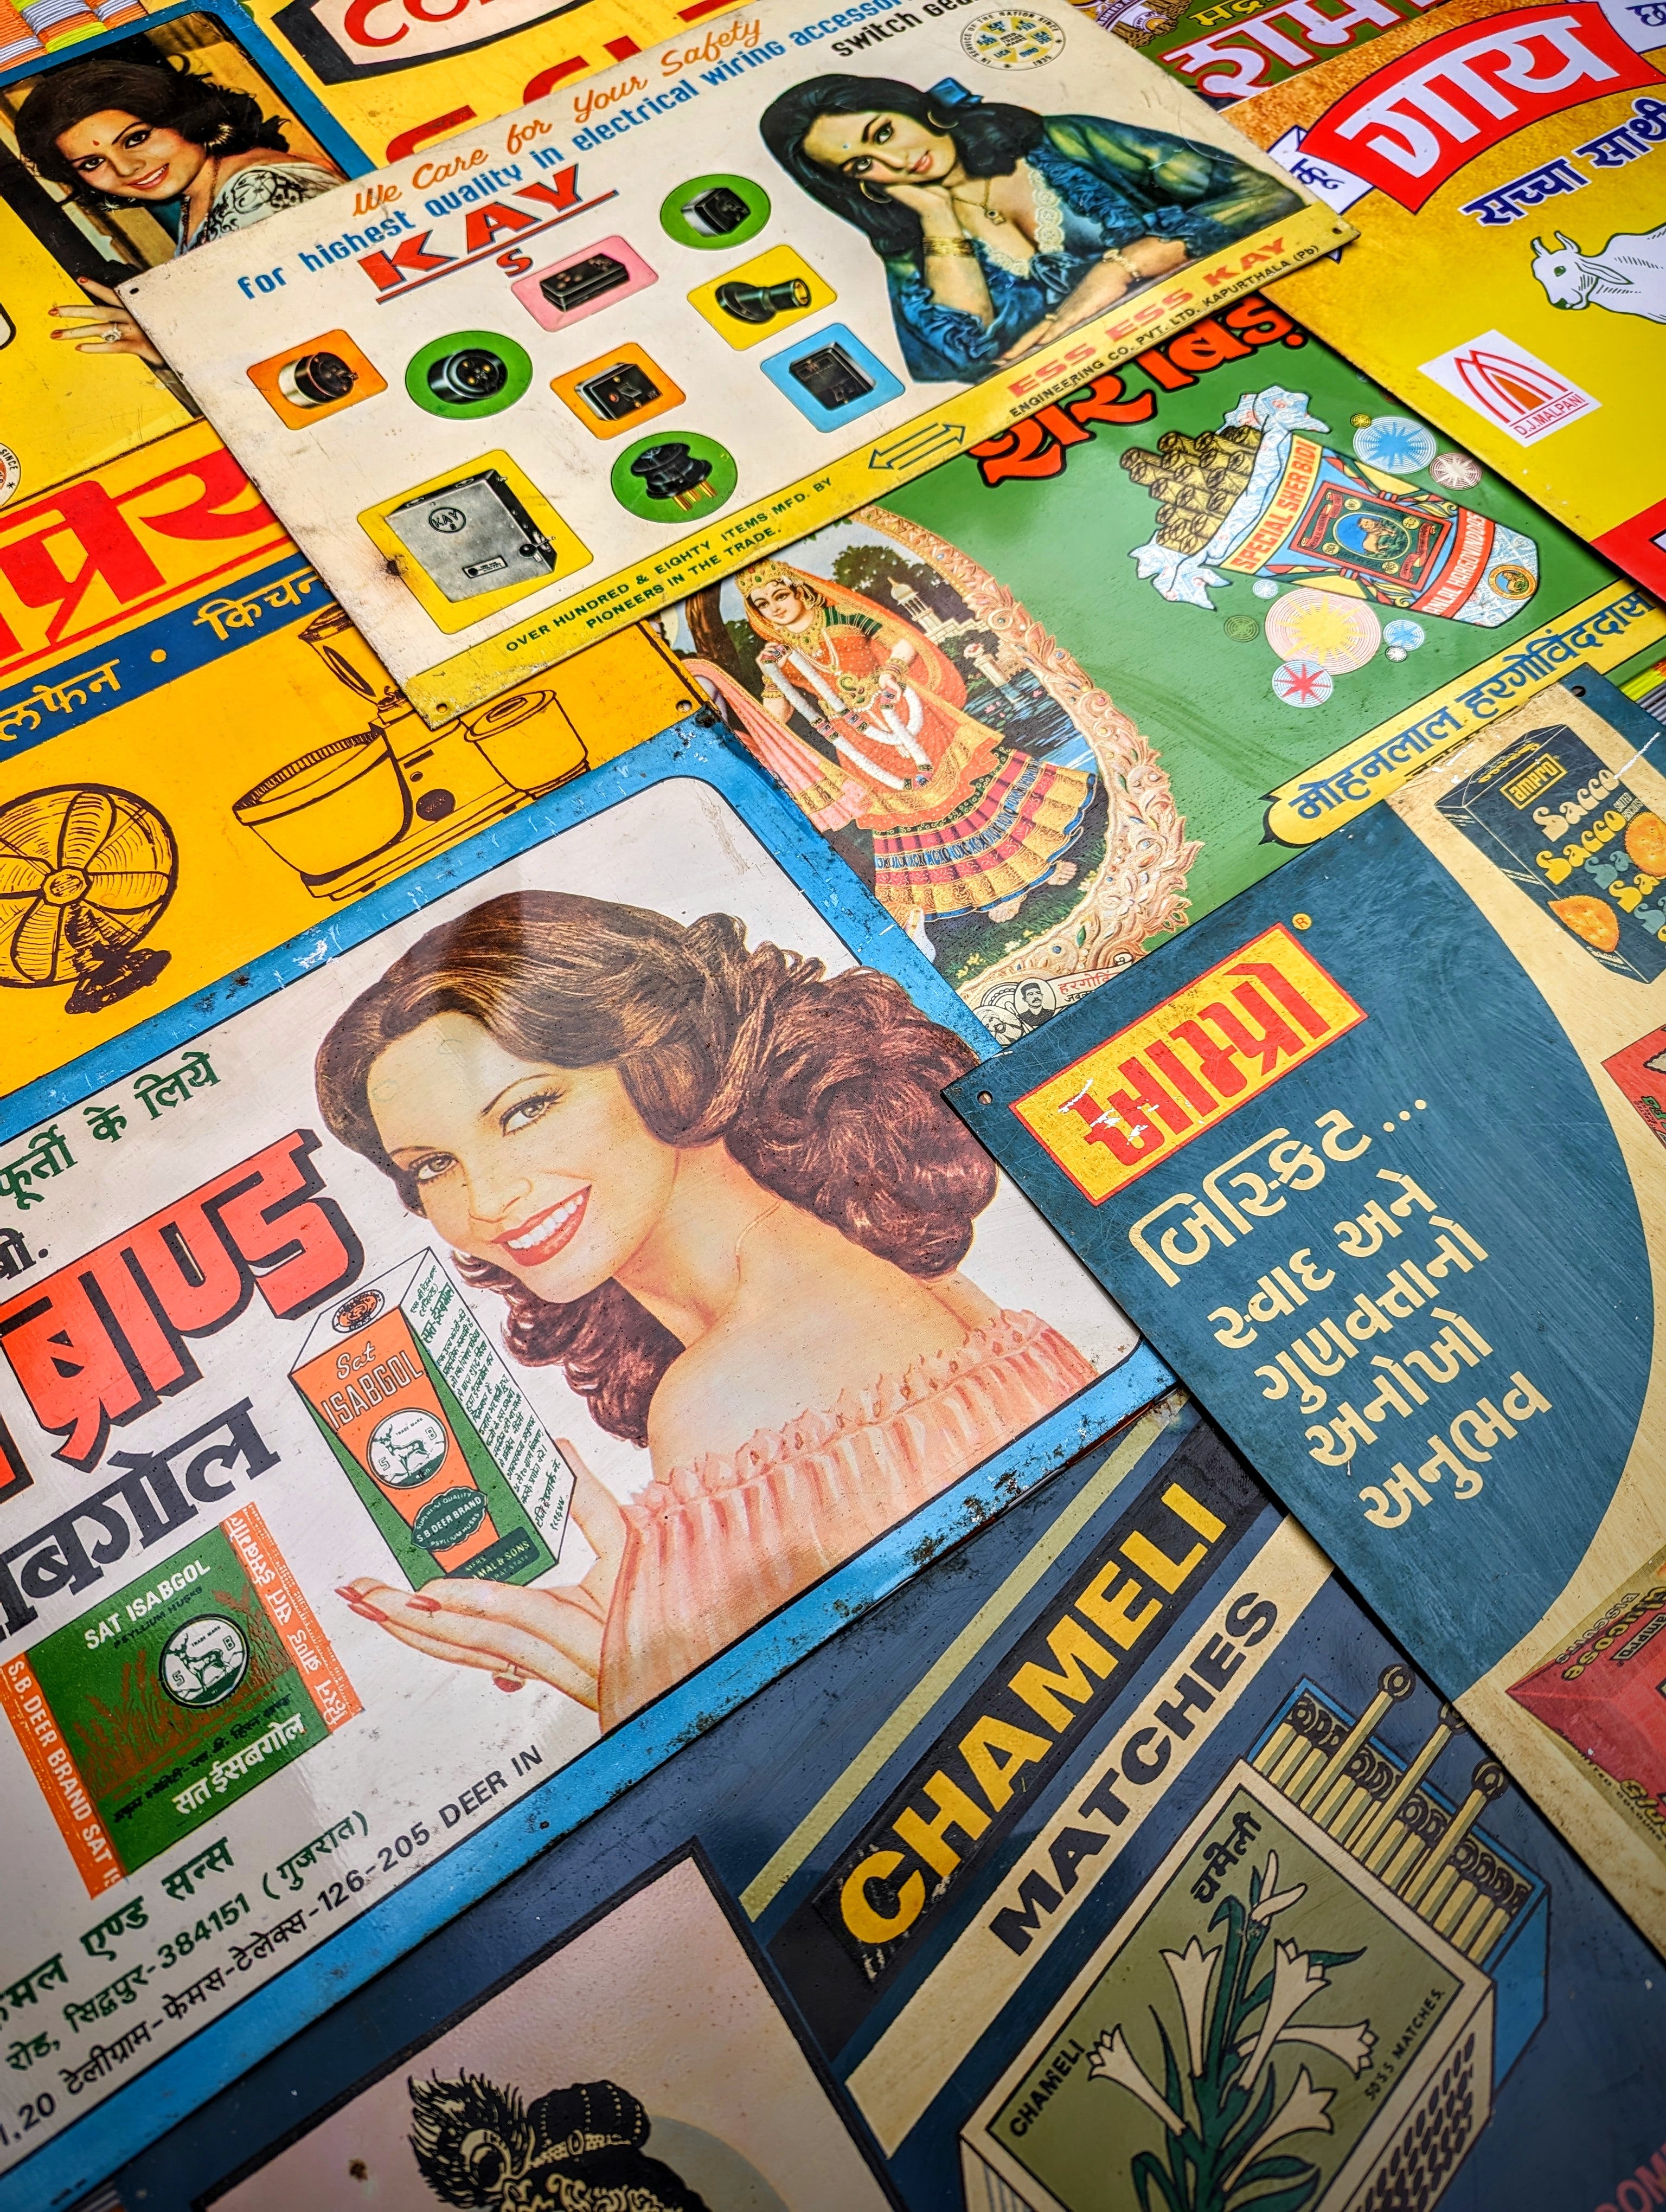 Vintage advertising printed tin signs sourced from deadstock  60s, 70s and 80s shop supply factories in Northern India.These are one of the things we most enjoy hunting for and having up all over our homes!!

So many types of printing, typefaces , graphic design styles and sizes......now which to choose?

Due to their age (and being stored in old factory buildings ) these have rust spots and slight scratching, please check the photos for details.

 

